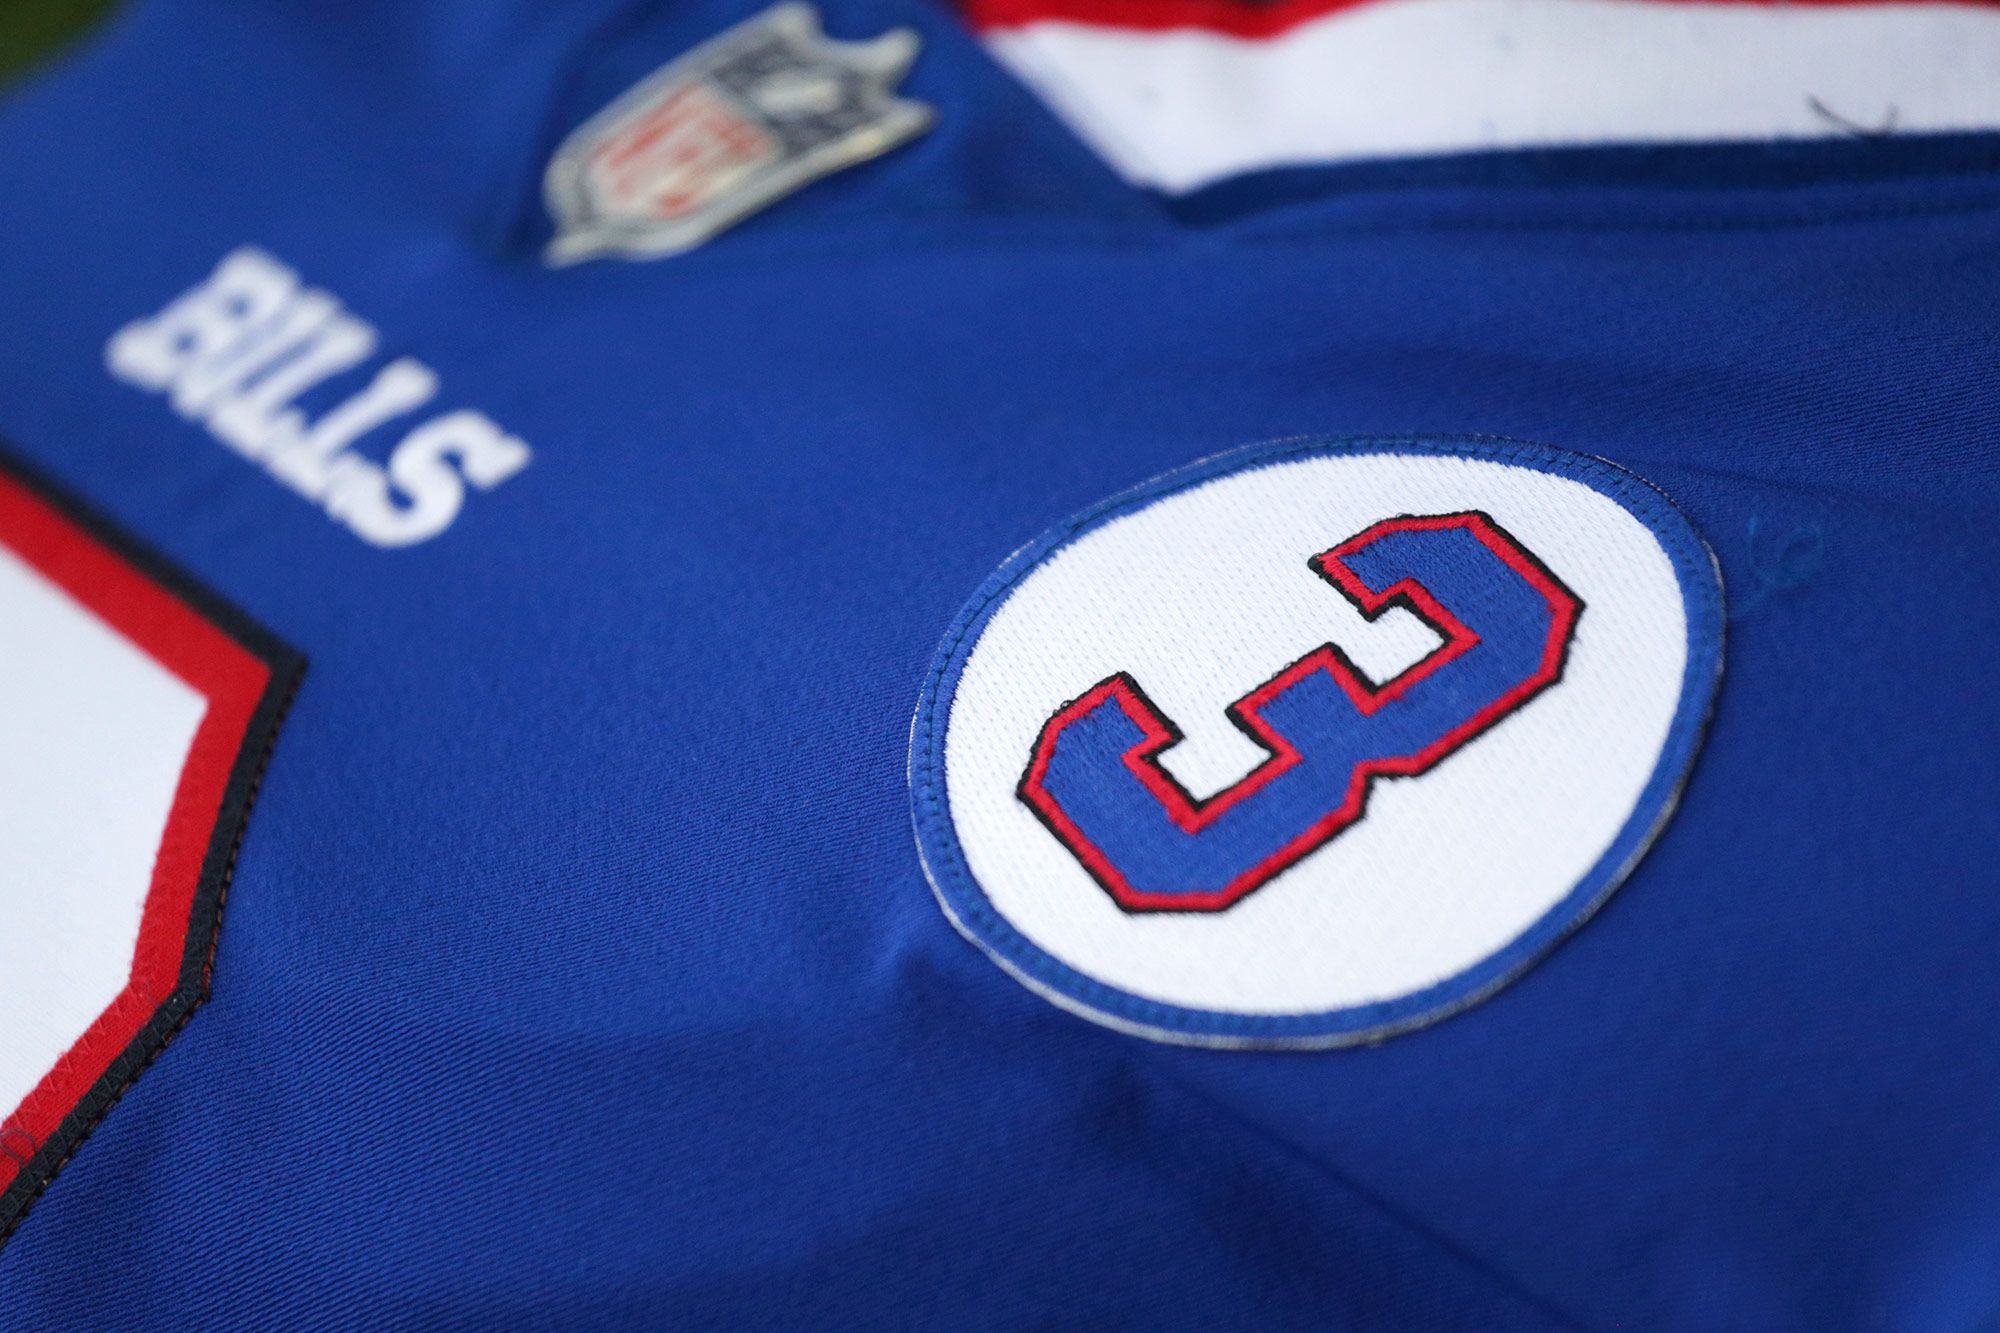 17) Watch: Hamlin patches get stitched on to Bills jerseys for